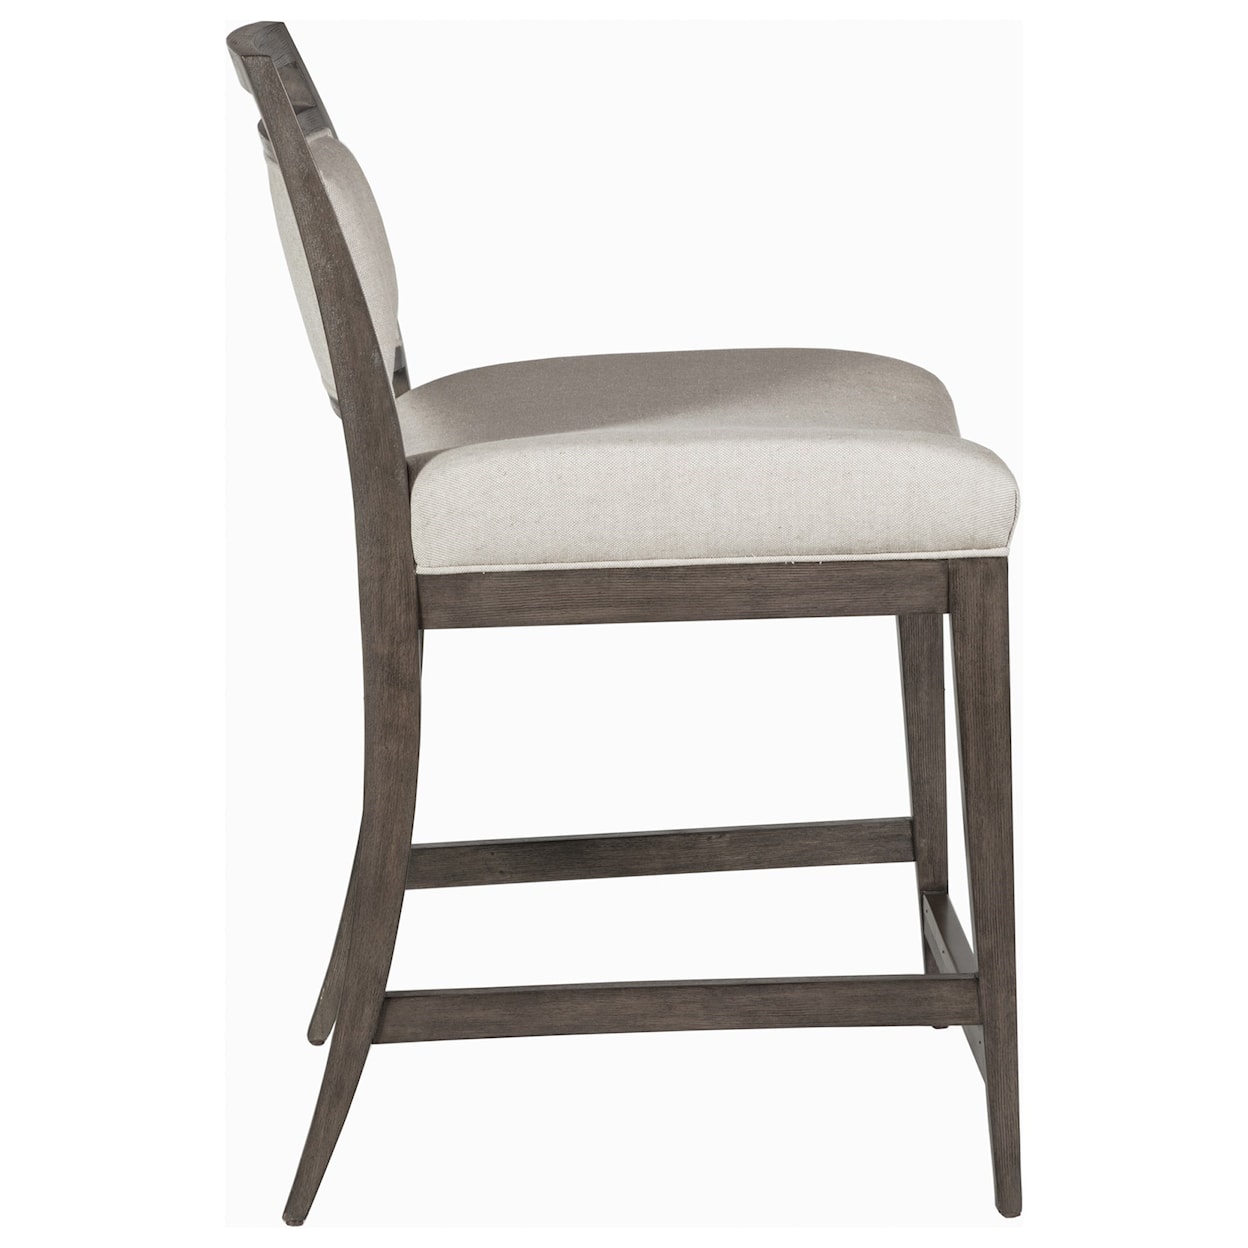 Artistica Cohesion Nico Upholstered Counter Stool